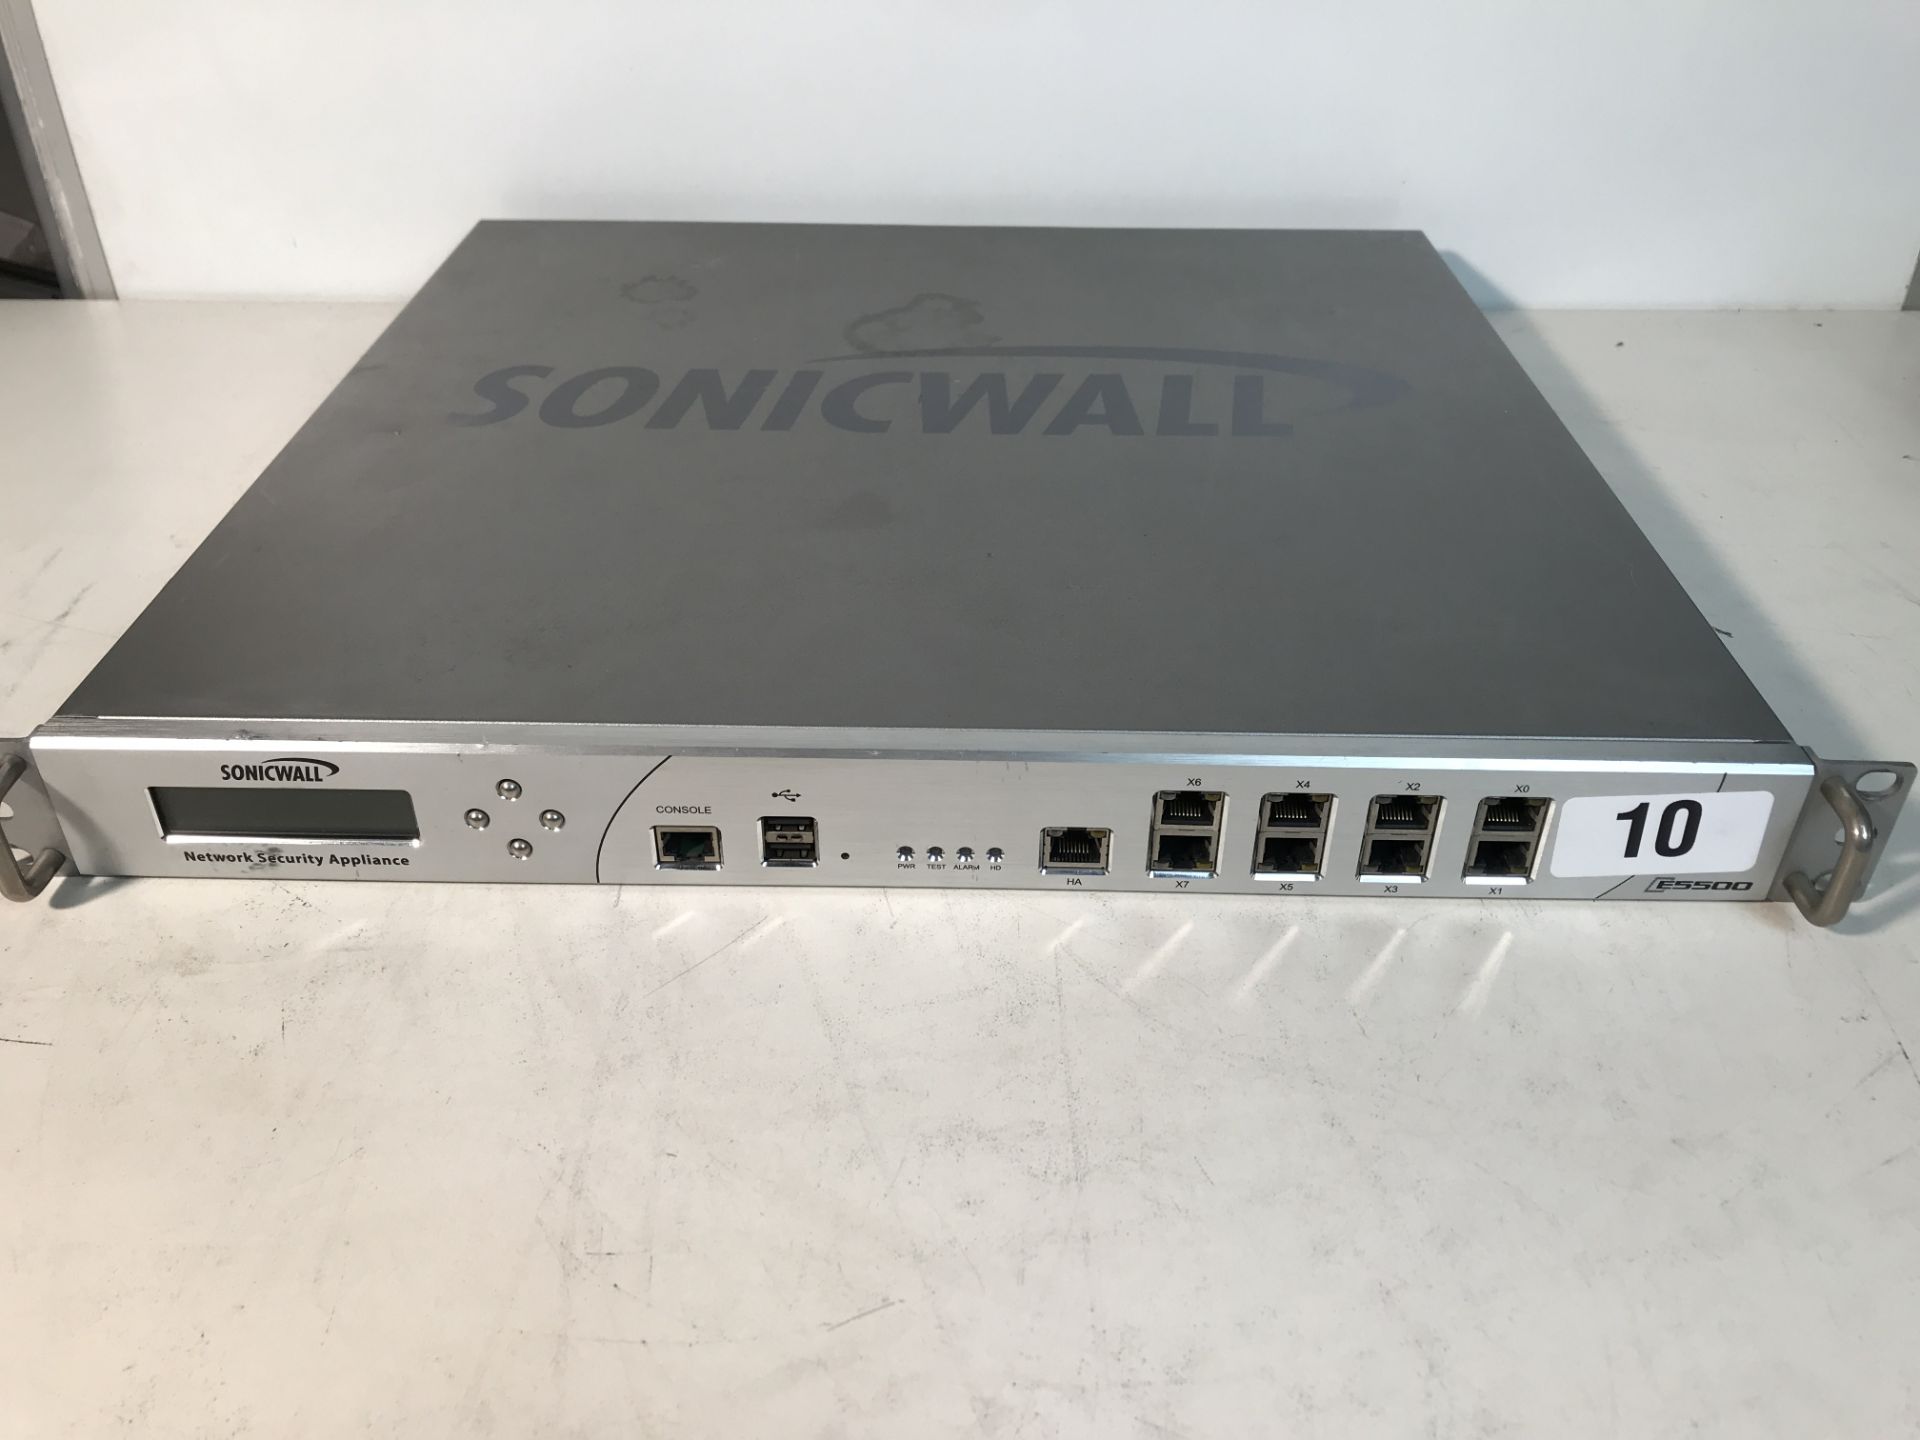 Sonicwall Network Security Appliance E5500